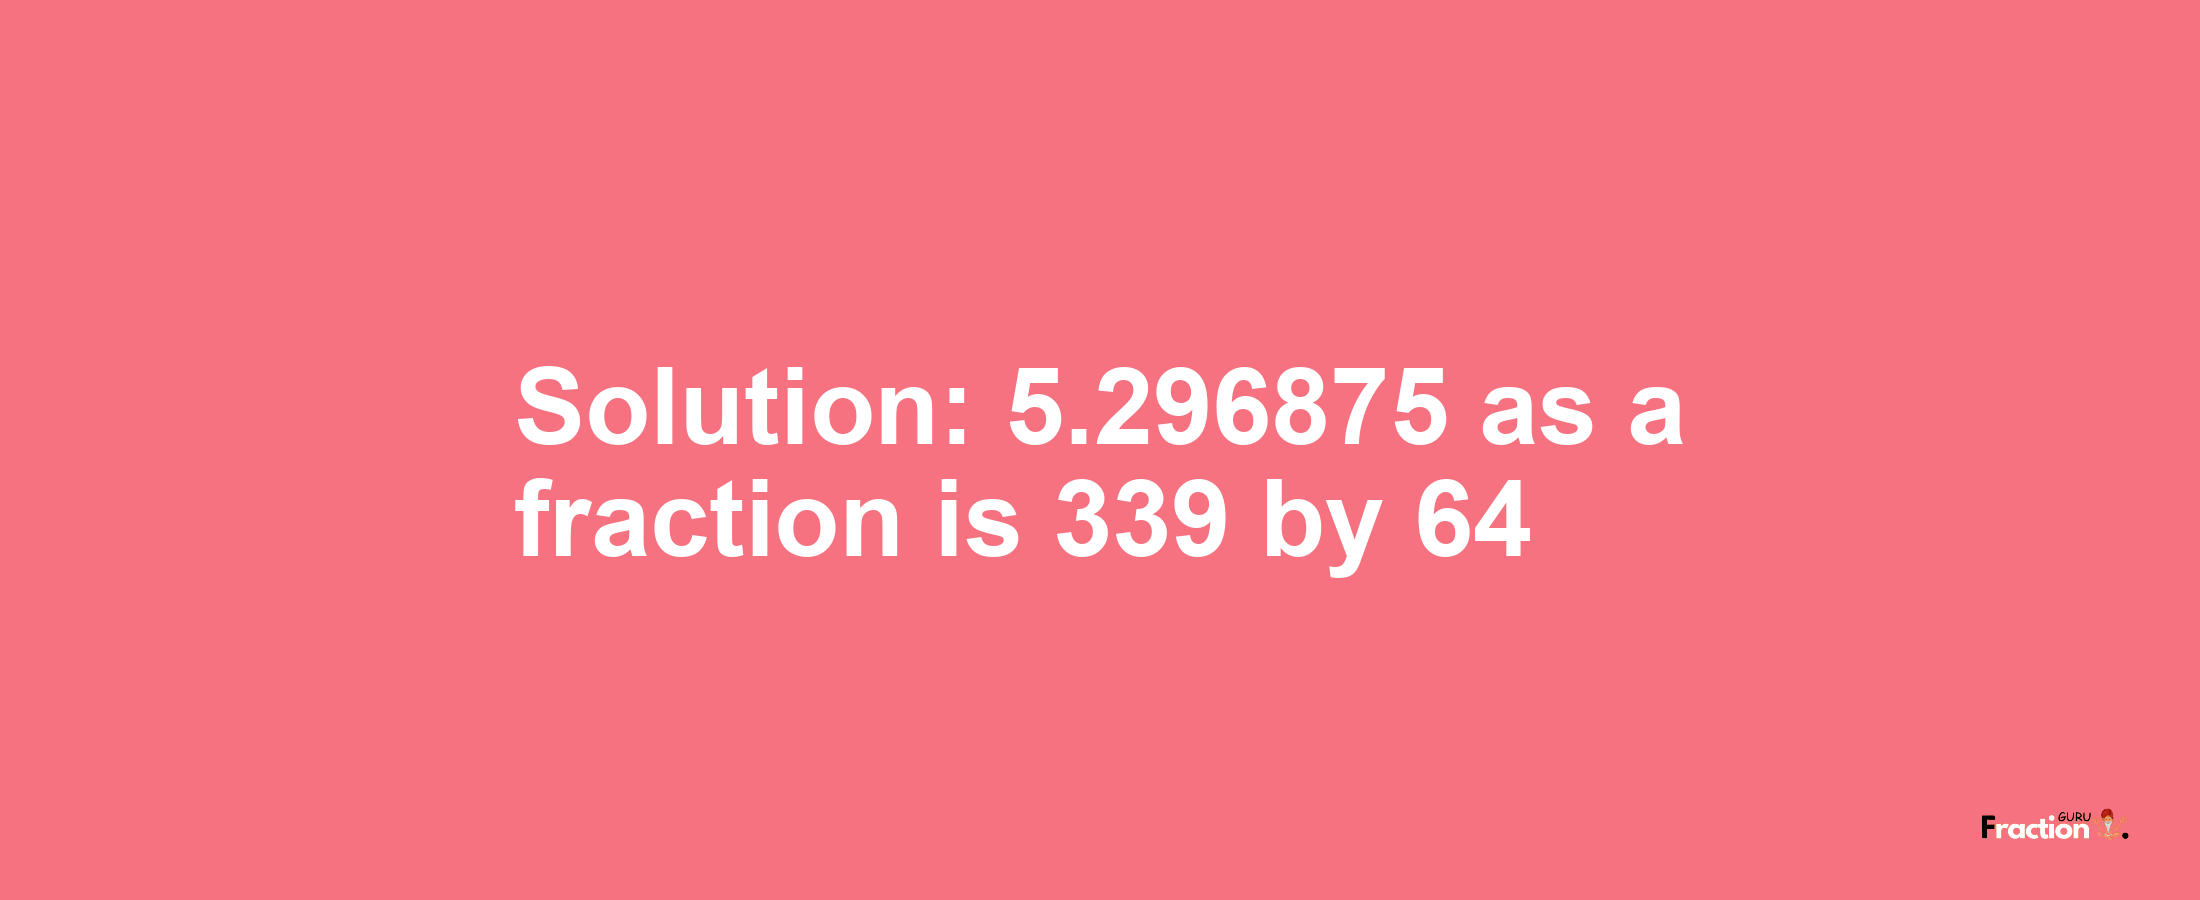 Solution:5.296875 as a fraction is 339/64